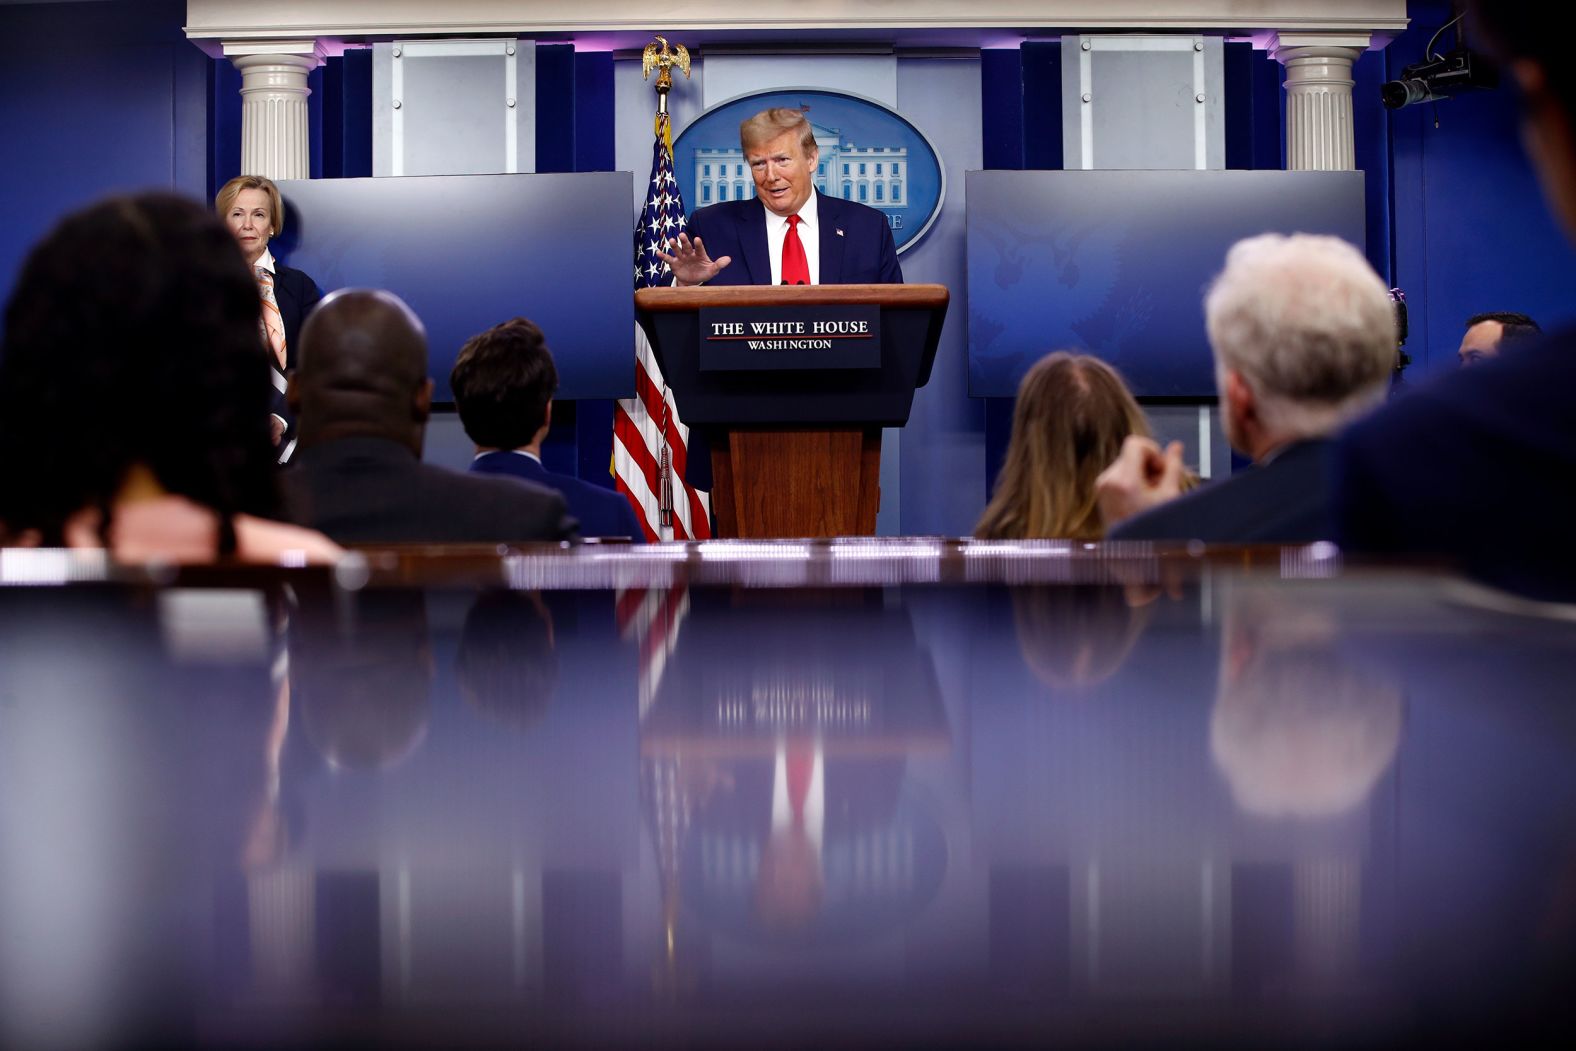 Trump speaks during the coronavirus briefing on April 18. Trump <a href="https://www.cnn.com/2020/04/18/politics/trump-governors-testing/index.html" target="_blank">repeatedly blamed governors</a> for not making full use of coronavirus testing capacity in their states, even as several Democrat and Republican governors said they were facing shortages of critical supplies to conduct tests. "They don't want to use all of the capacity that we've created. We have tremendous capacity," Trump said. "They know that. The governors know that. The Democrat governors know that. They're the ones that are complaining."